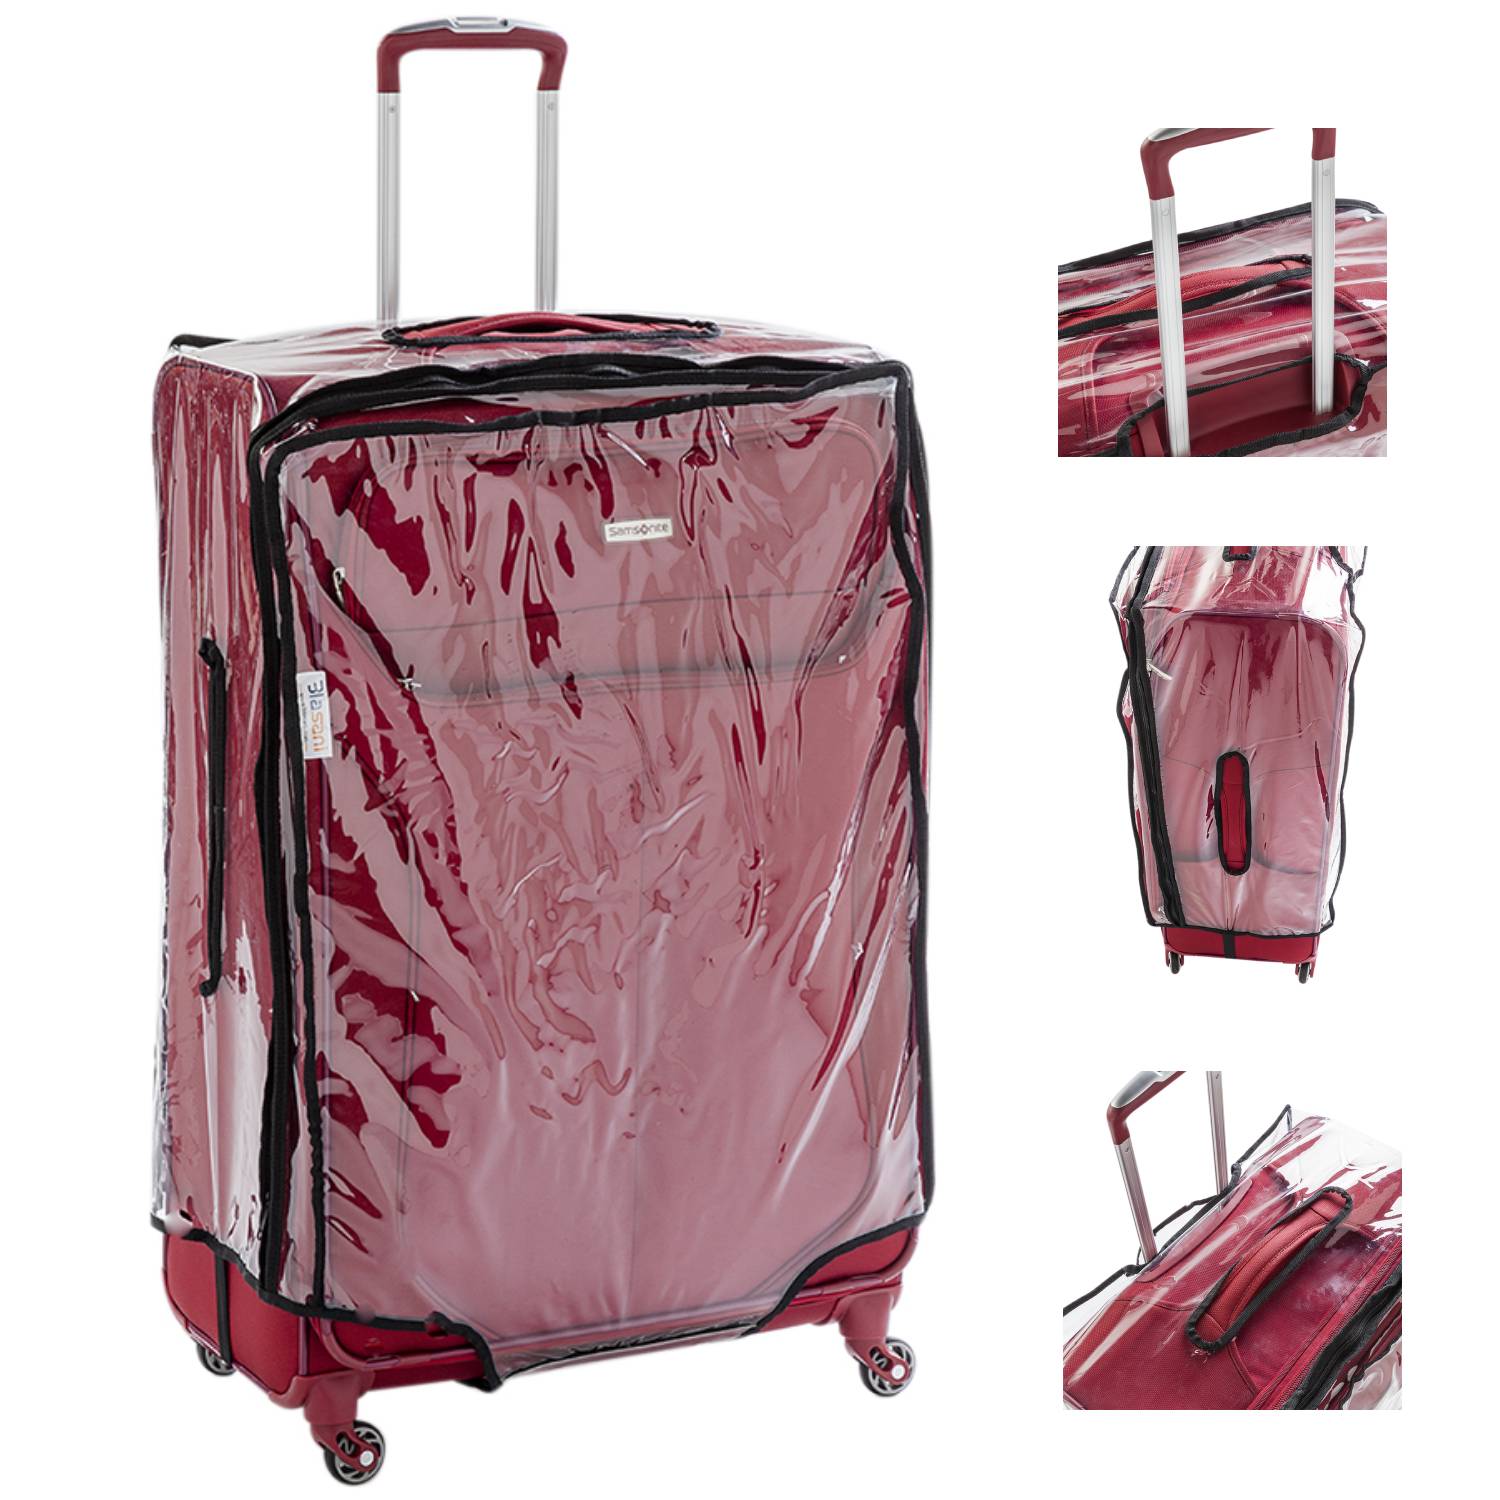 BLASANI Luggage Protector Suitcase Clear PVC Waterproof TSA Aproveed Cover Fits Most (20"~21") Bags